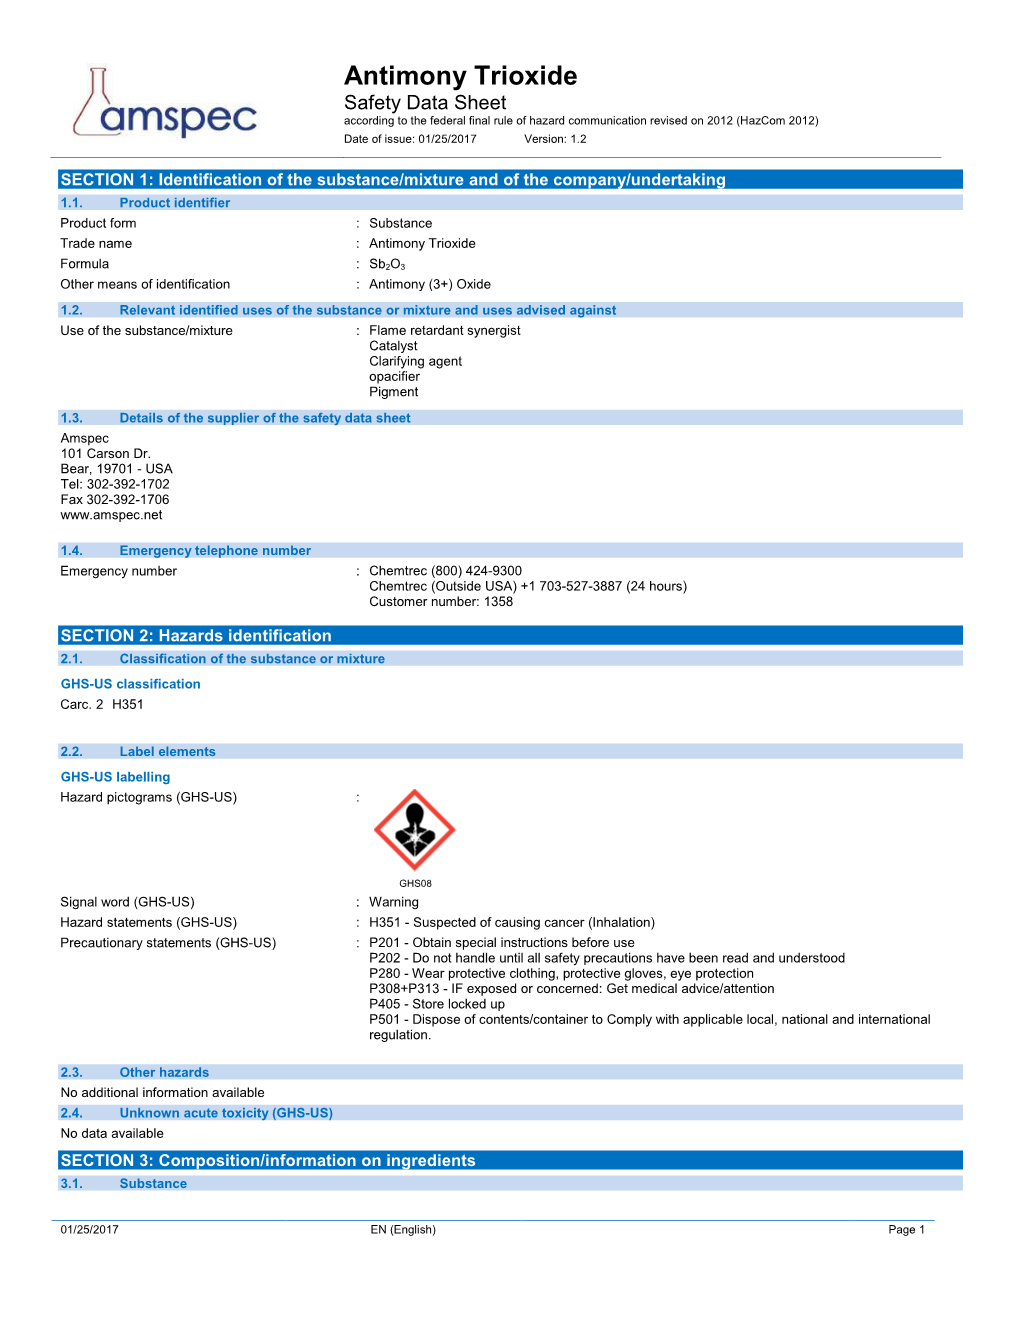 Antimony Trioxide Safety Data Sheet According to the Federal Final Rule of Hazard Communication Revised on 2012 (Hazcom 2012)